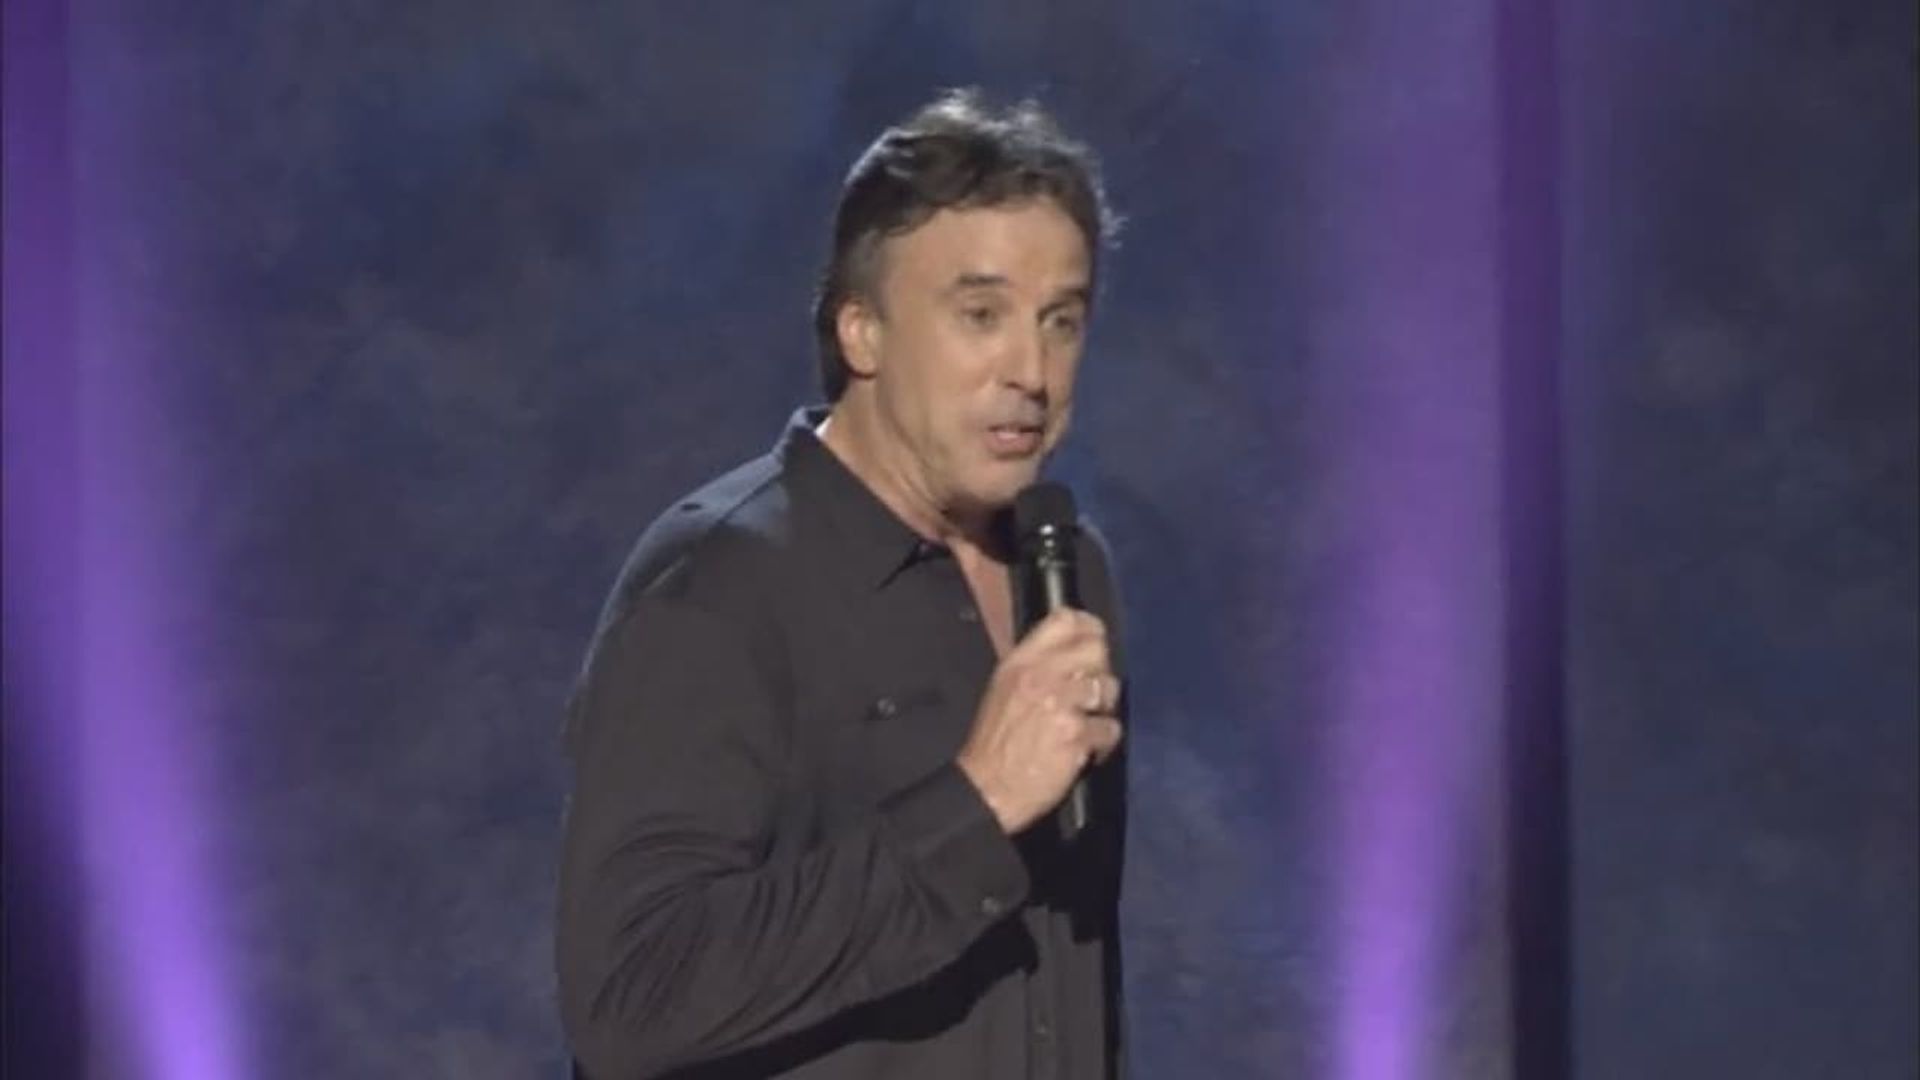 Kevin Nealon: Now Hear Me Out! background